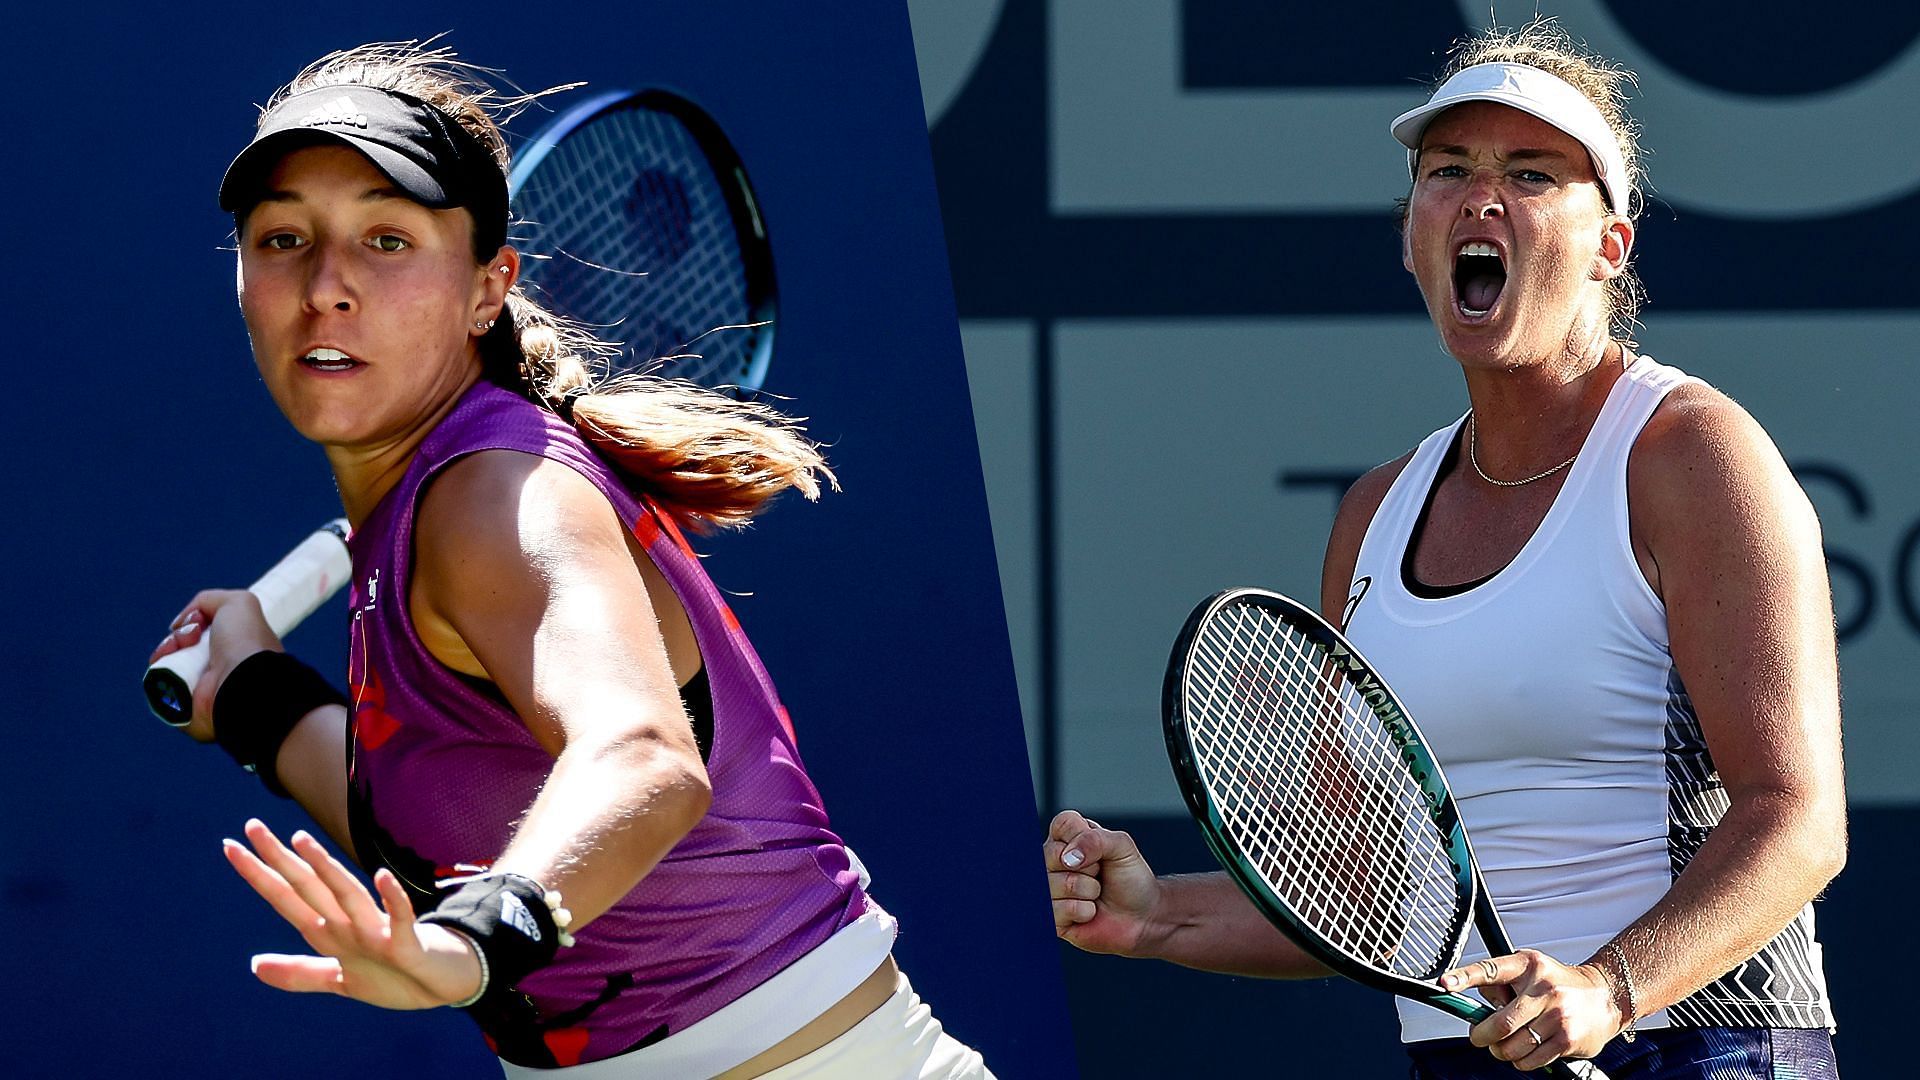 Jessica Pegula will face Coco Vandeweghe in the second round of the San Diego Open